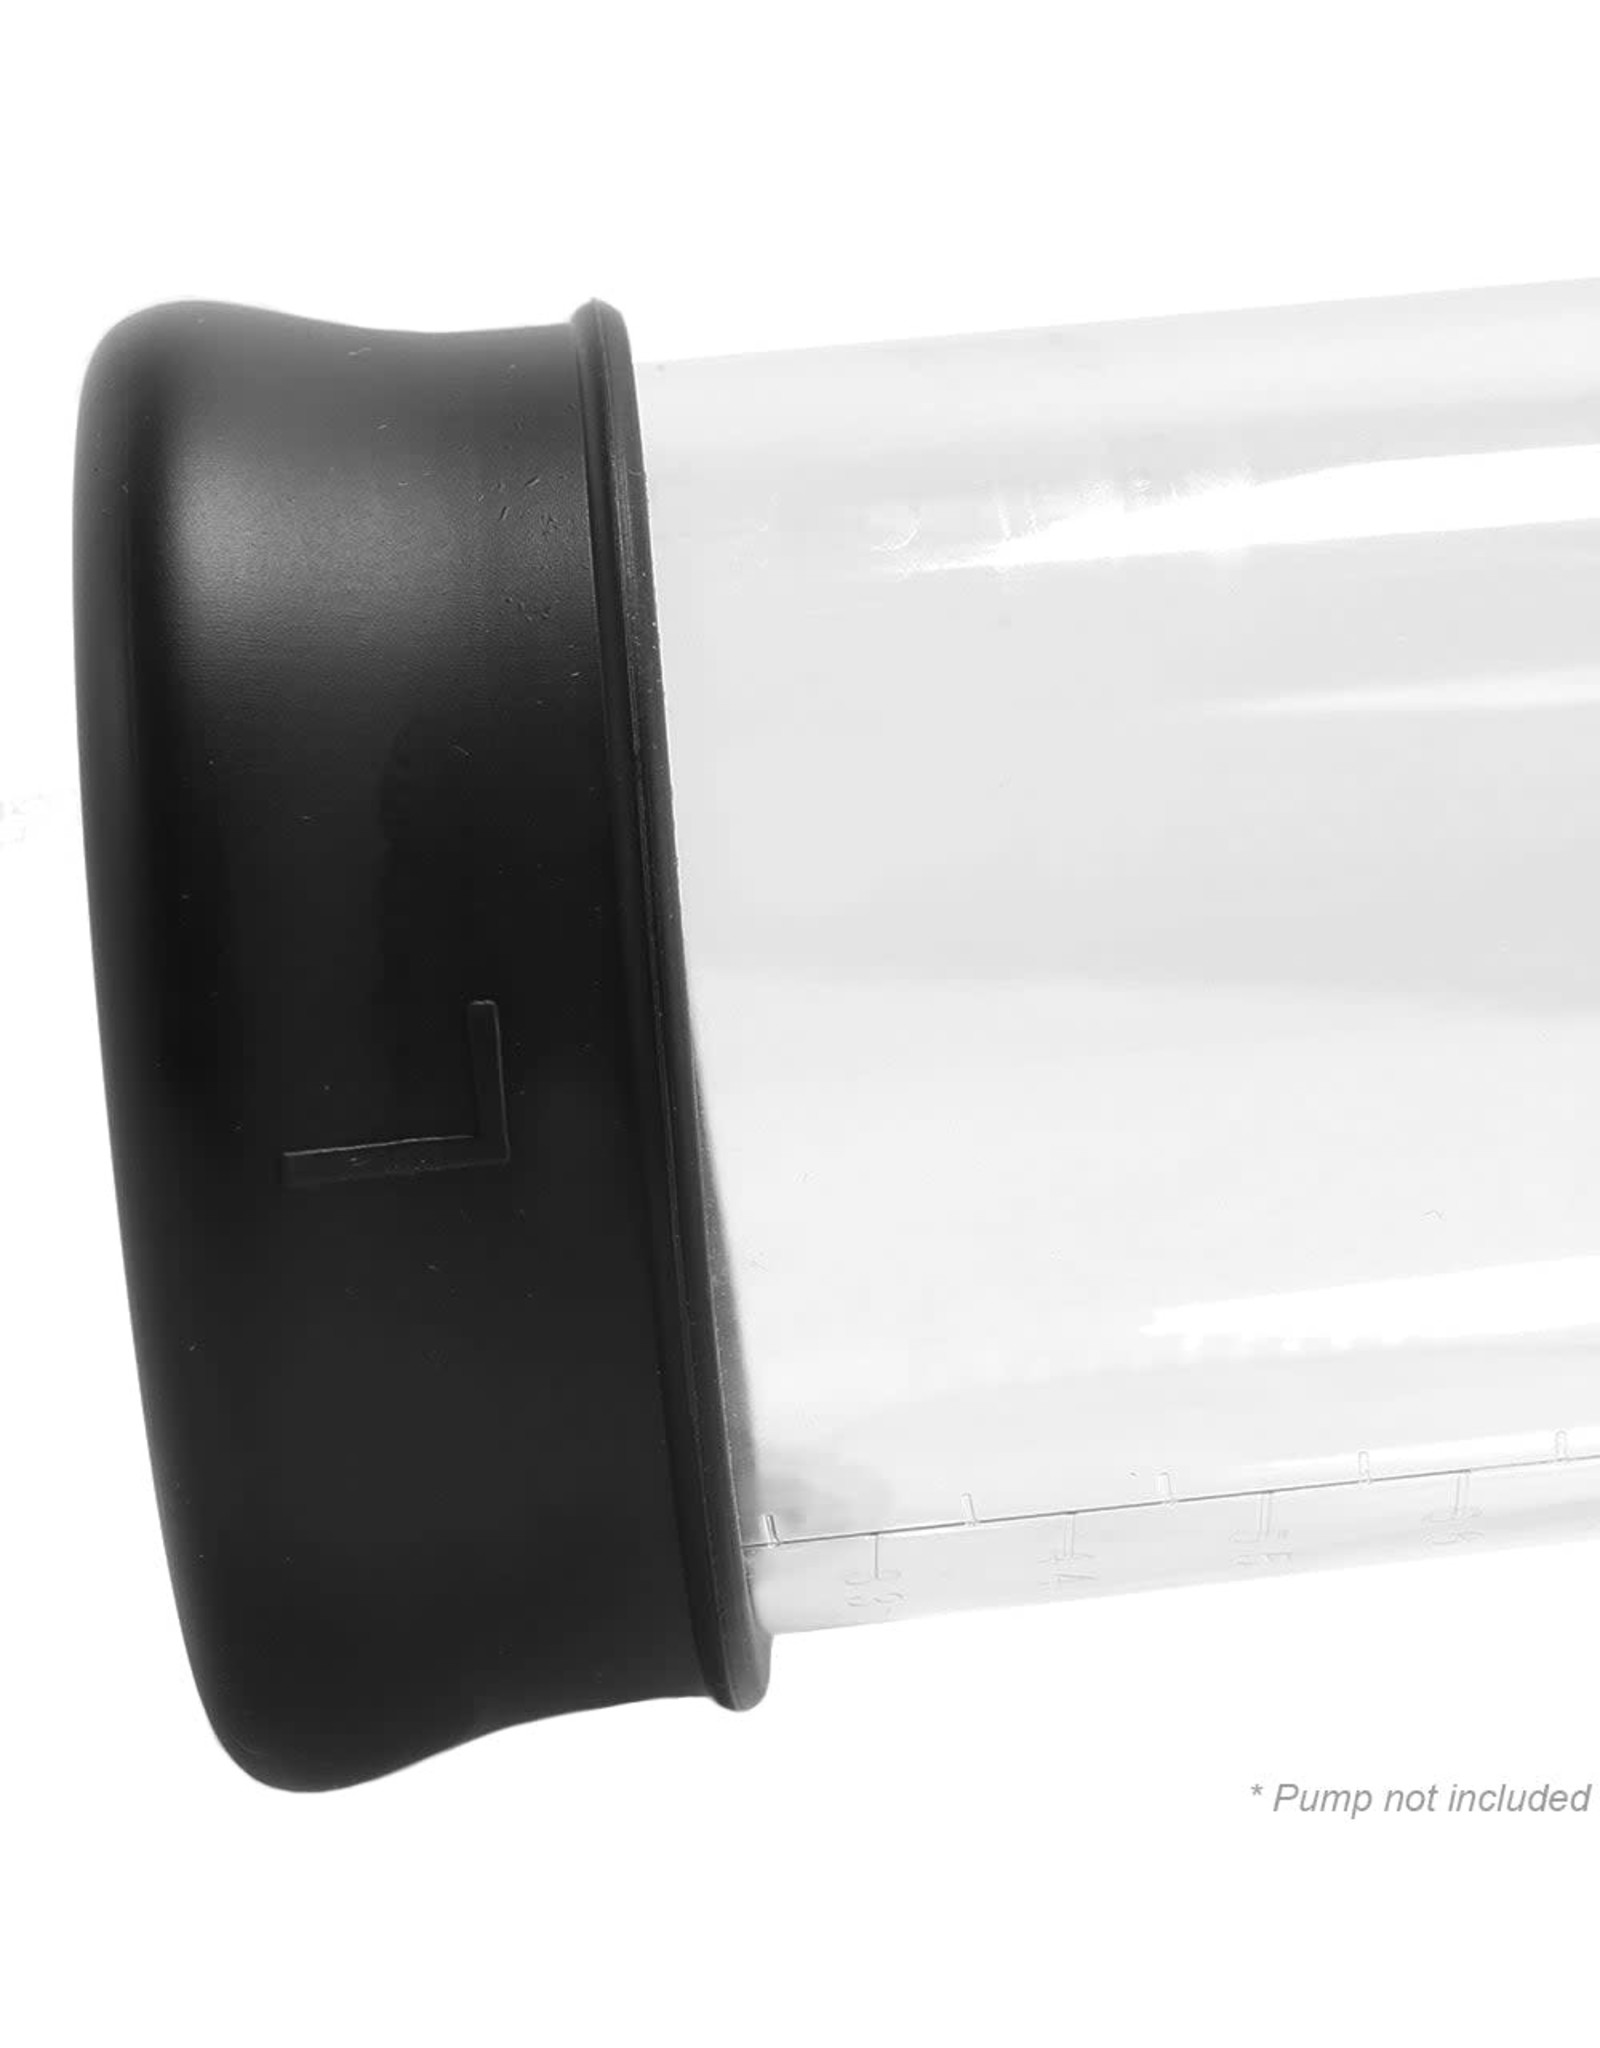 Pumped - Silicone Pump Sleeve - Large